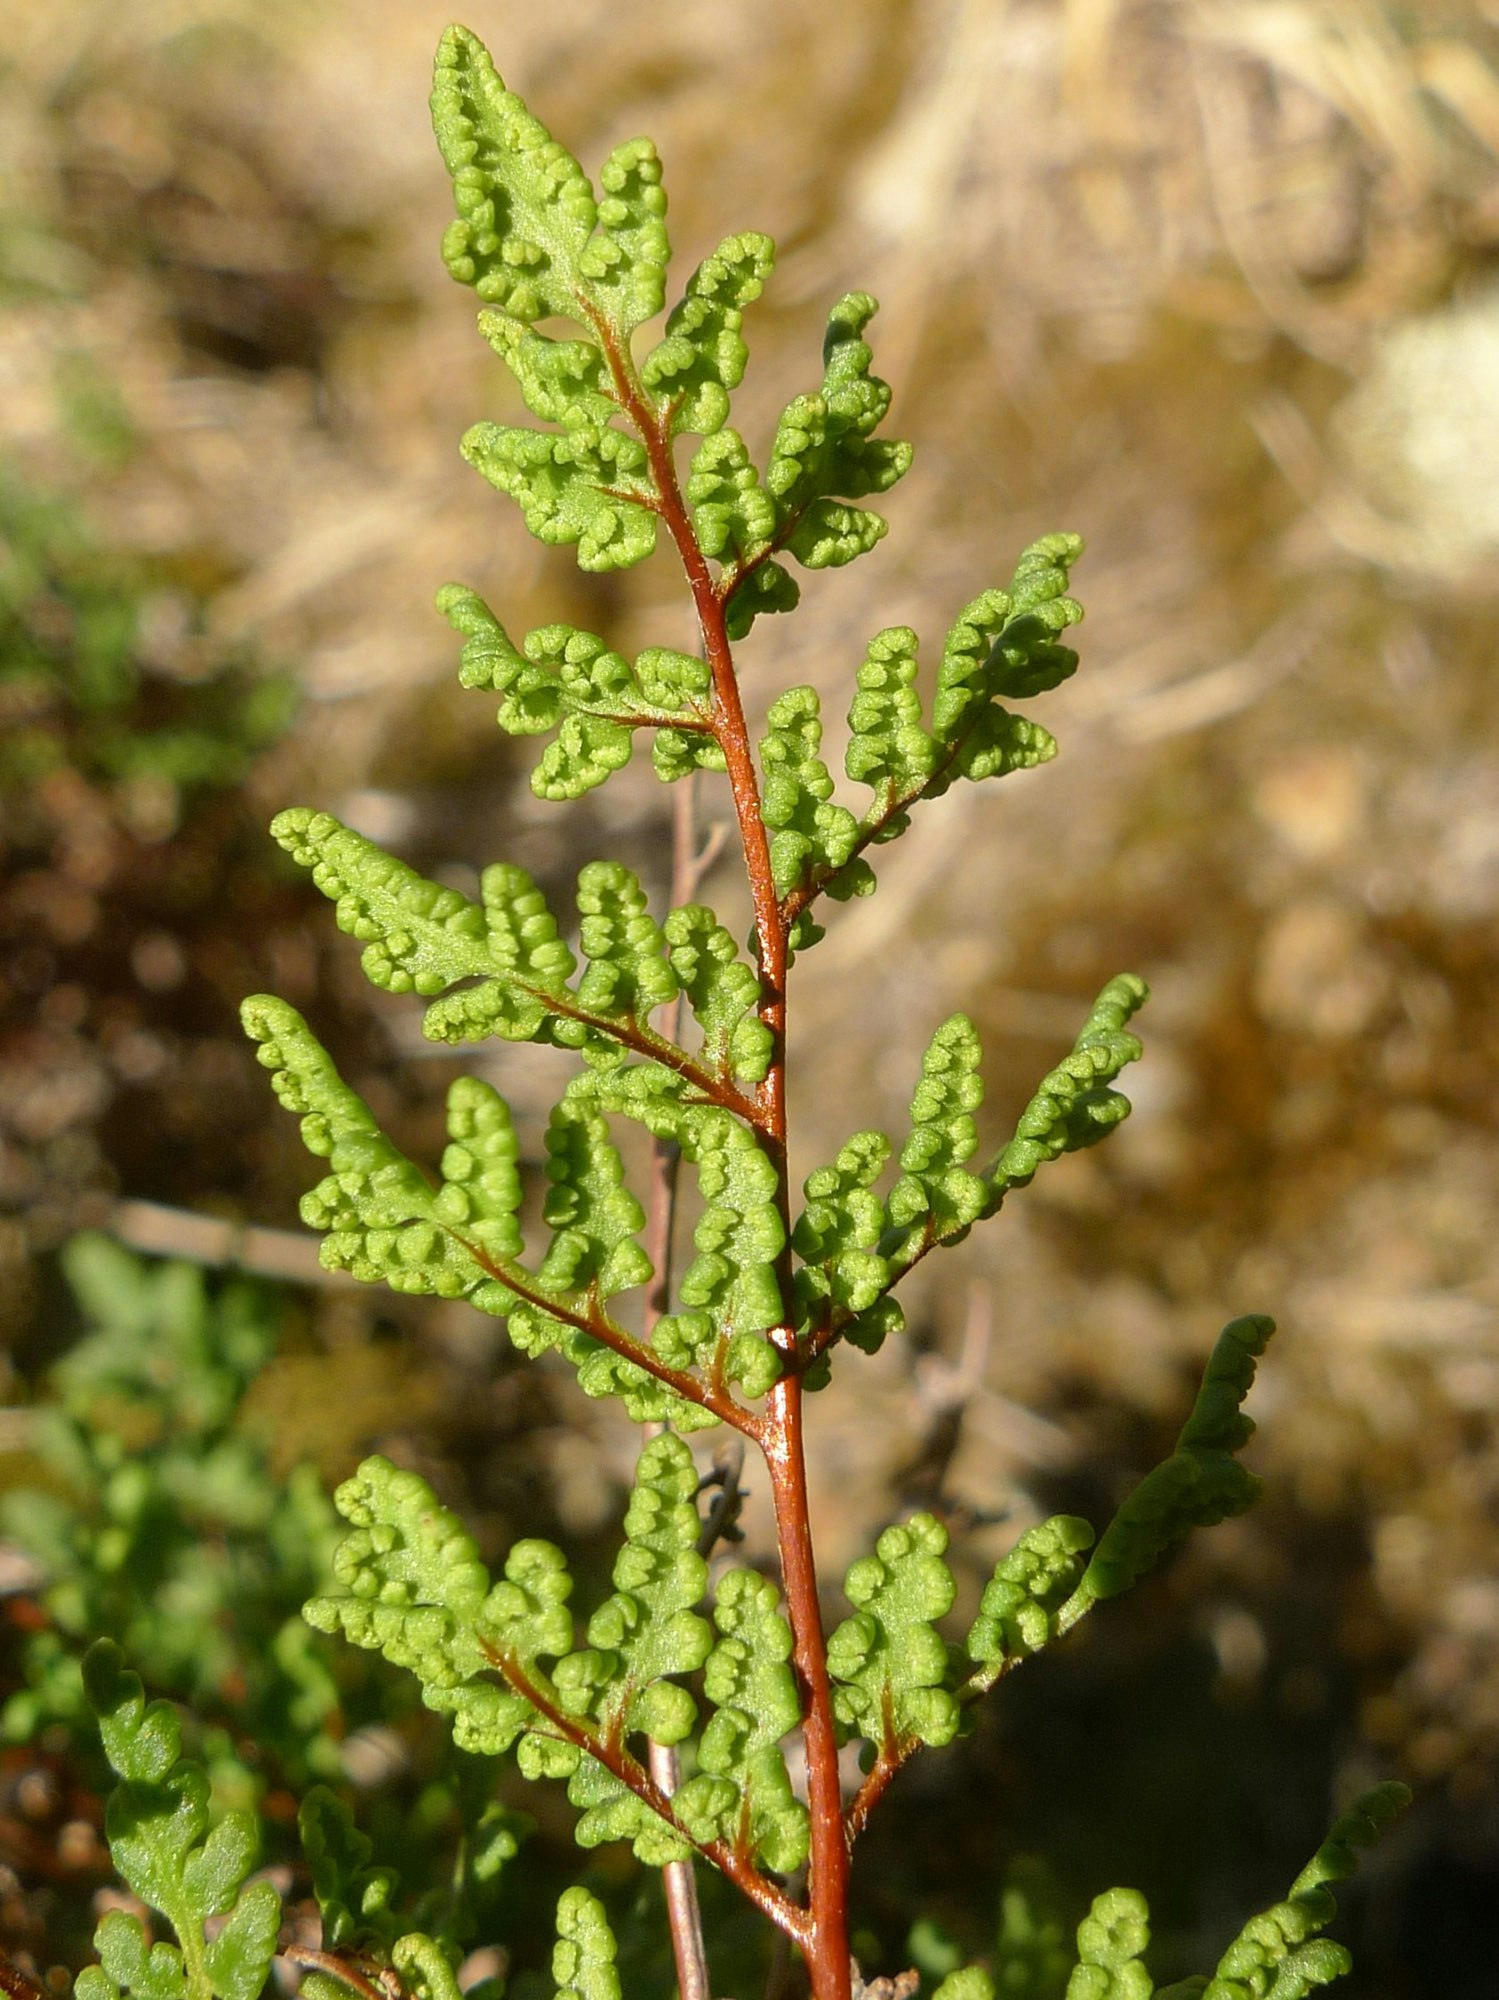 Close up of the end of a plant with small green curling fronds